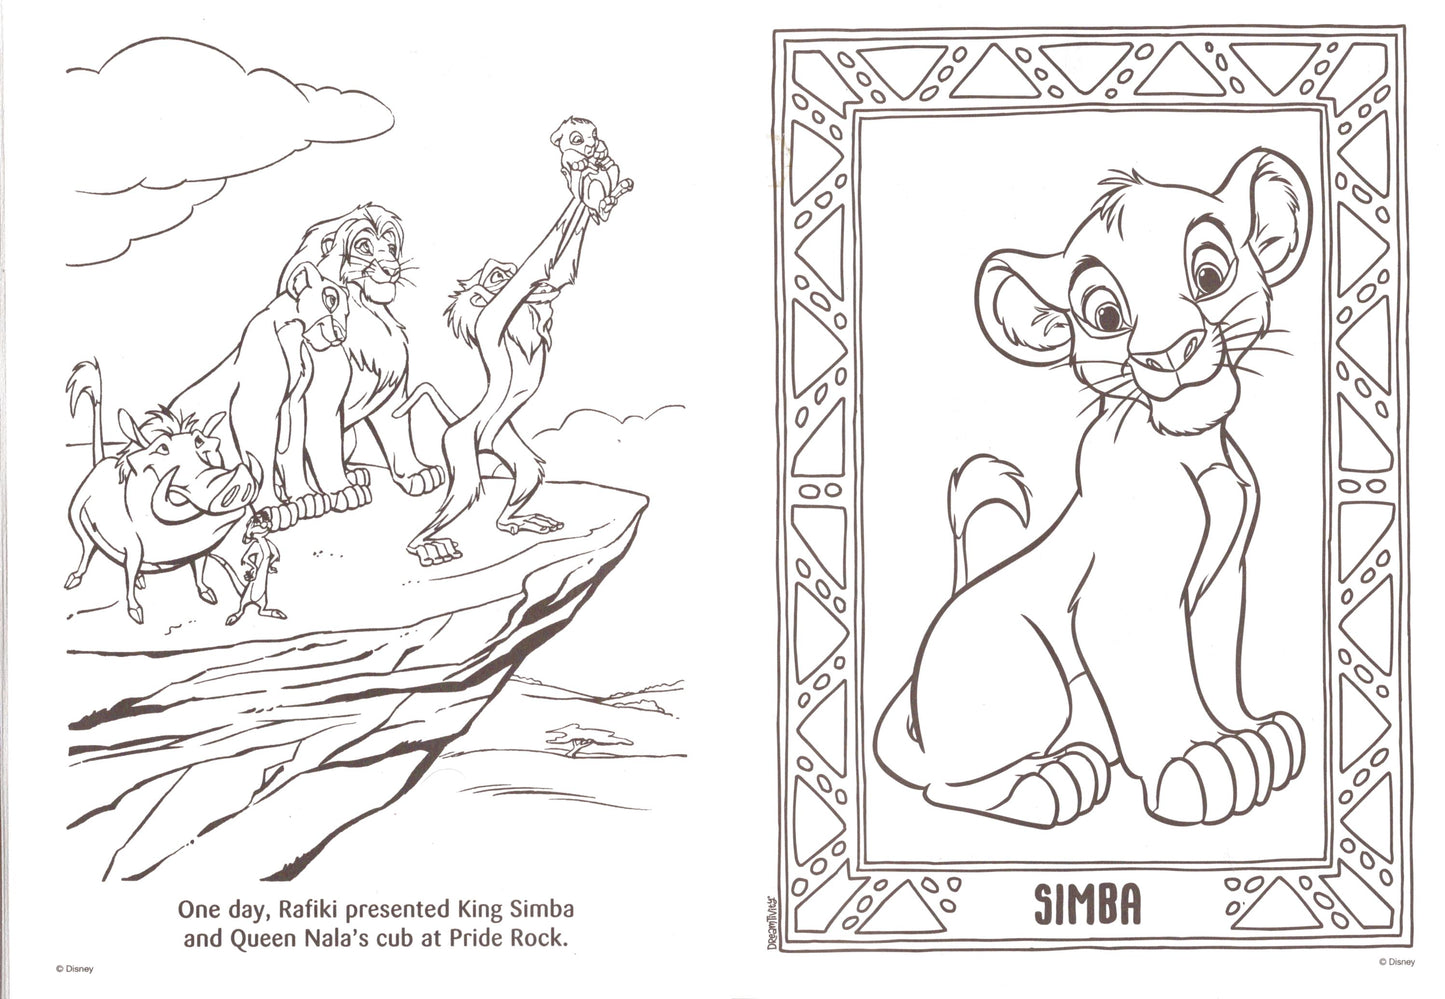 Disney The Lion King - Wild Fun & Friends with the King - Coloring & Activity Book (Set of 2 Books)